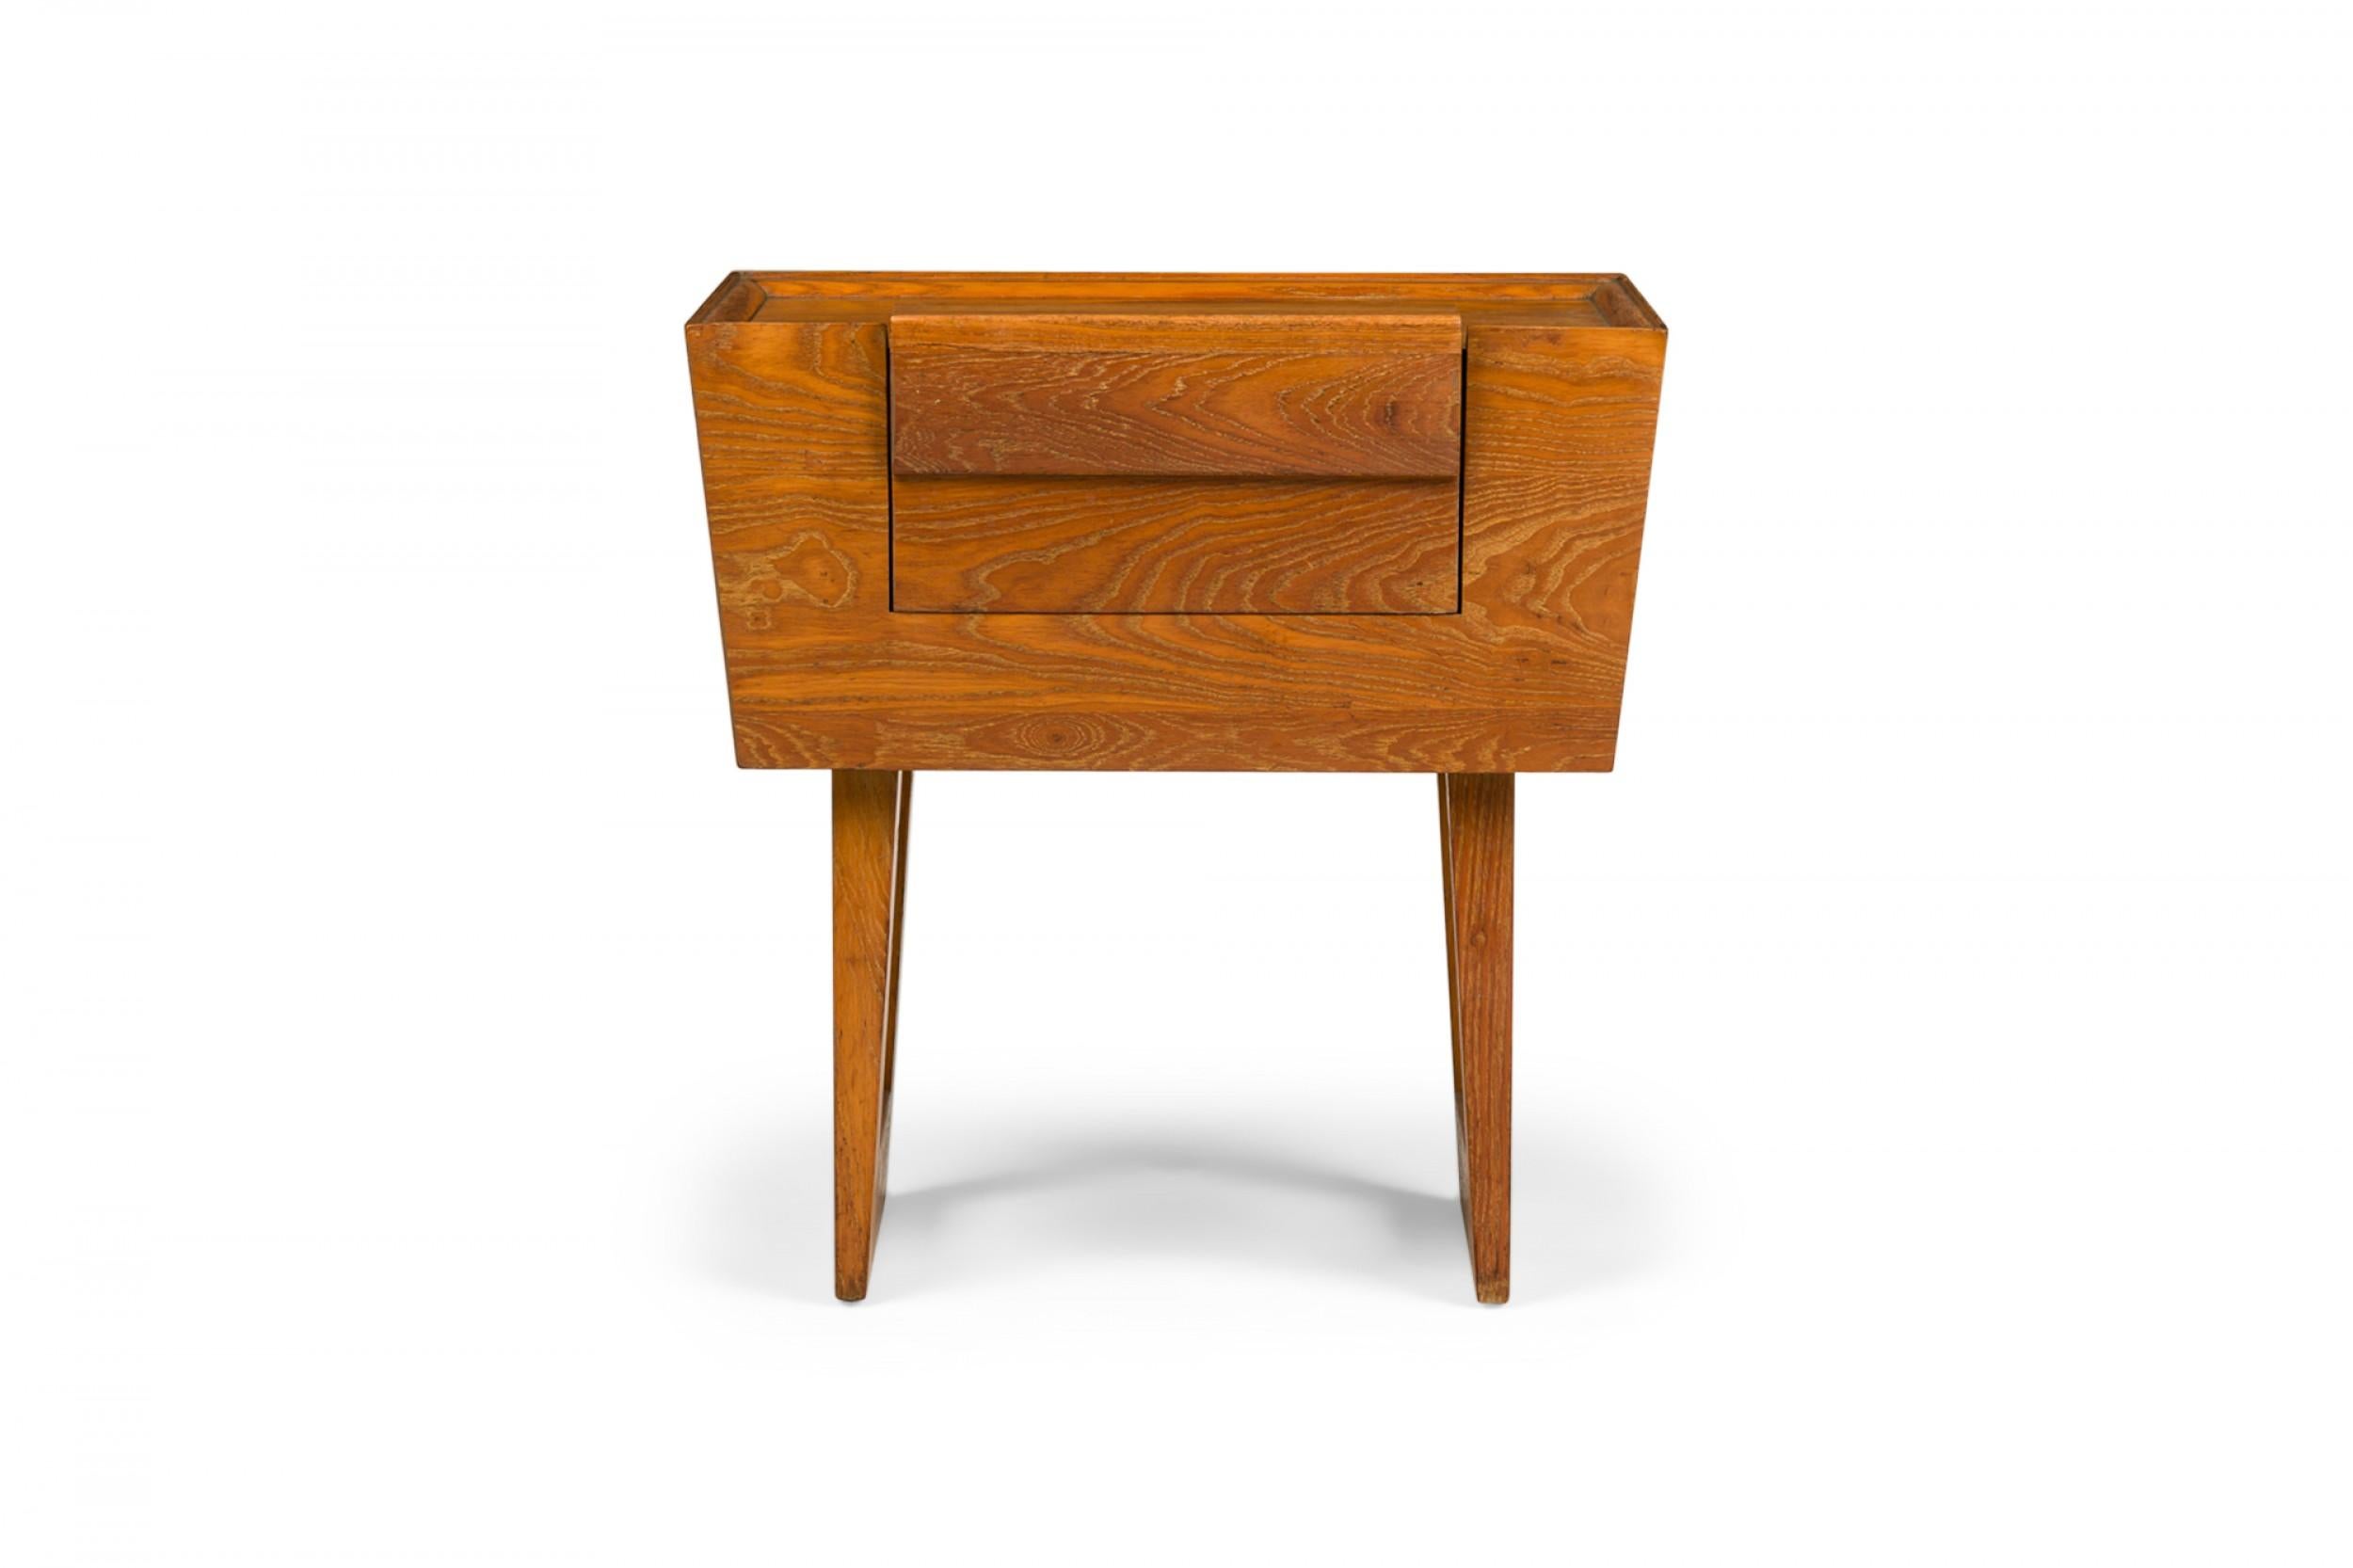 PAIR of American Mid-Century wooden nightstands with tapered trapezoidal cabinets containing a single drawer, resting on two bracket-shaped legs. (PAUL LASZLO FOR BROWN SALTMAN)(PRICED AS PAIR)(Similar pieces: DUF0738, DUF0740).